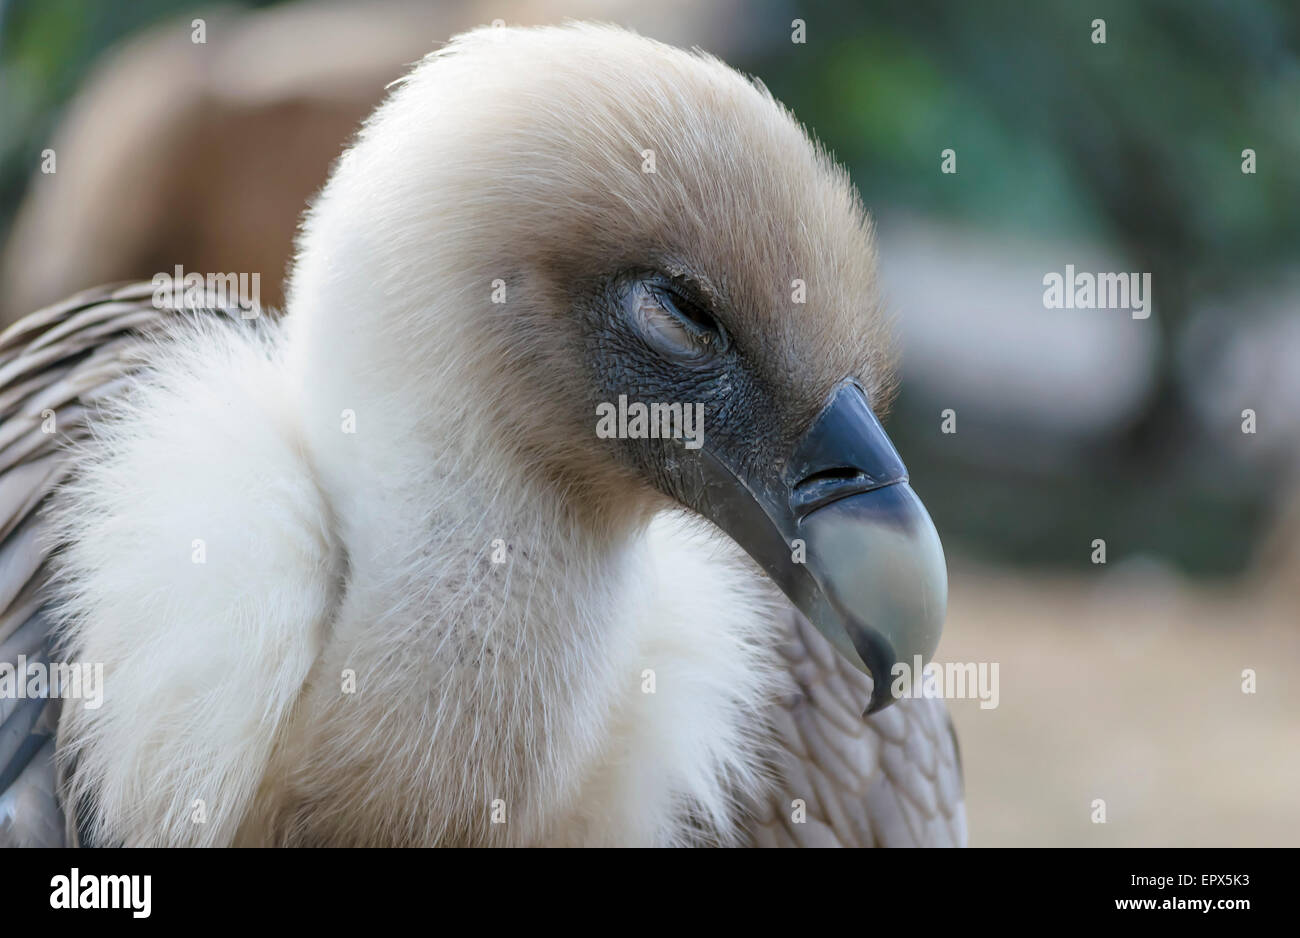 This buzzard is trying to sleep, and for this reason, he has his eye practically closed Stock Photo